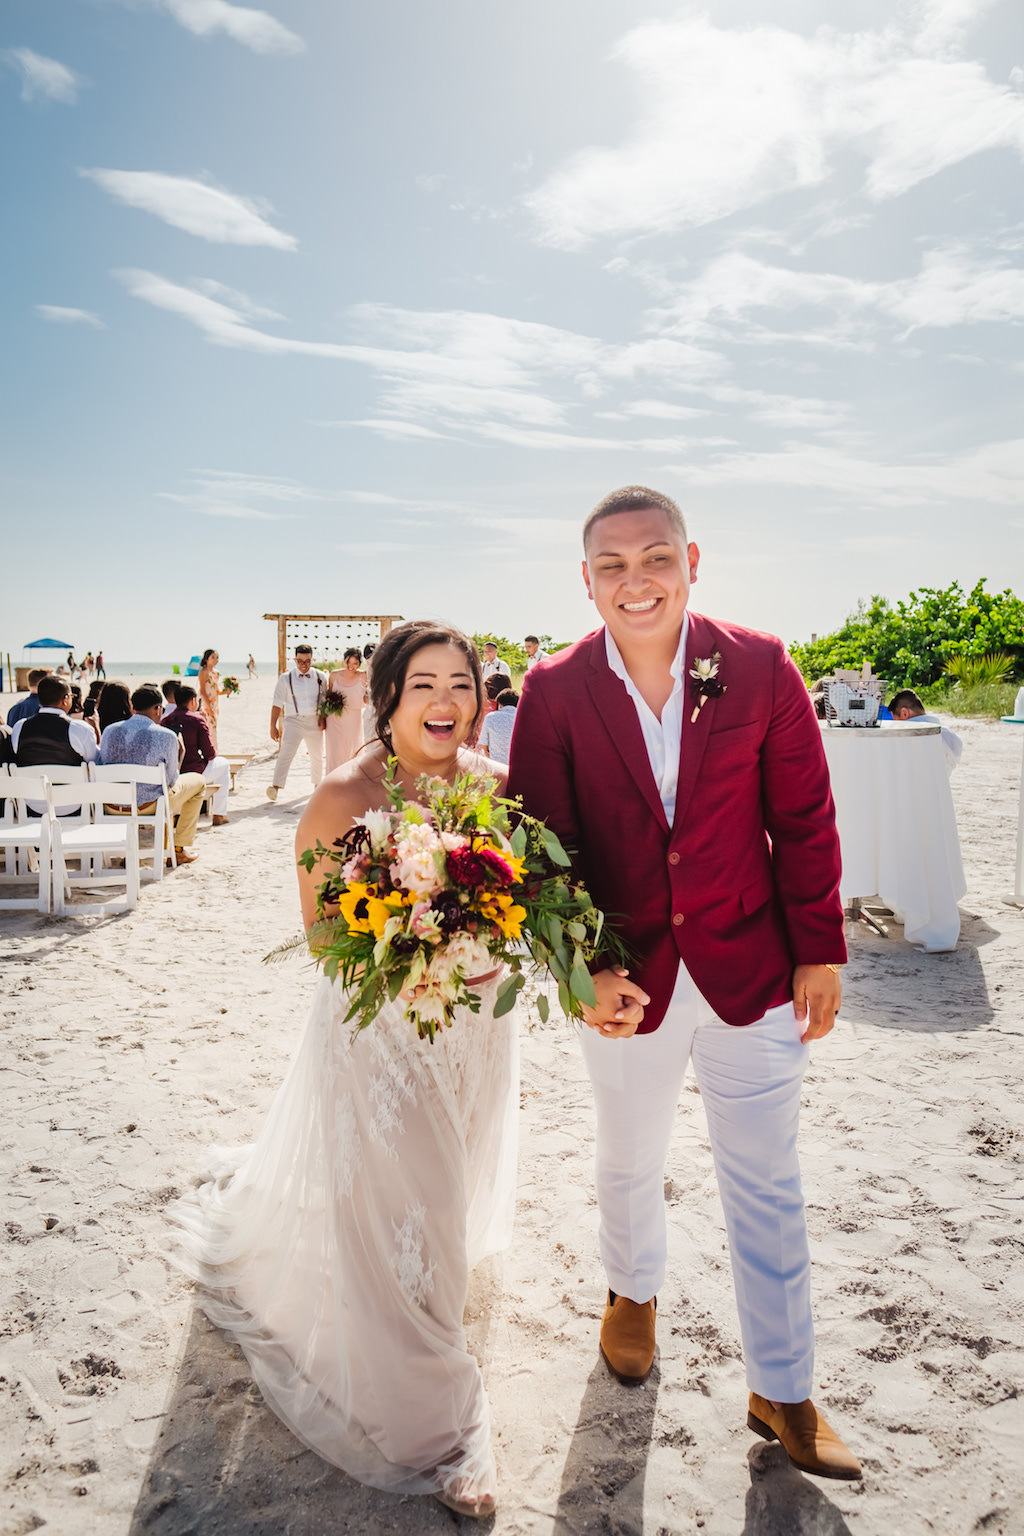 Tampa Bay Bride and Groom Beachfront Happy Wedding Ceremony Recessional Exit Portrait, Bride Holding Tropical Organic Yellow Sunflower, Red, Pink and Purple Flowers and Greenery Bridal Bouquet